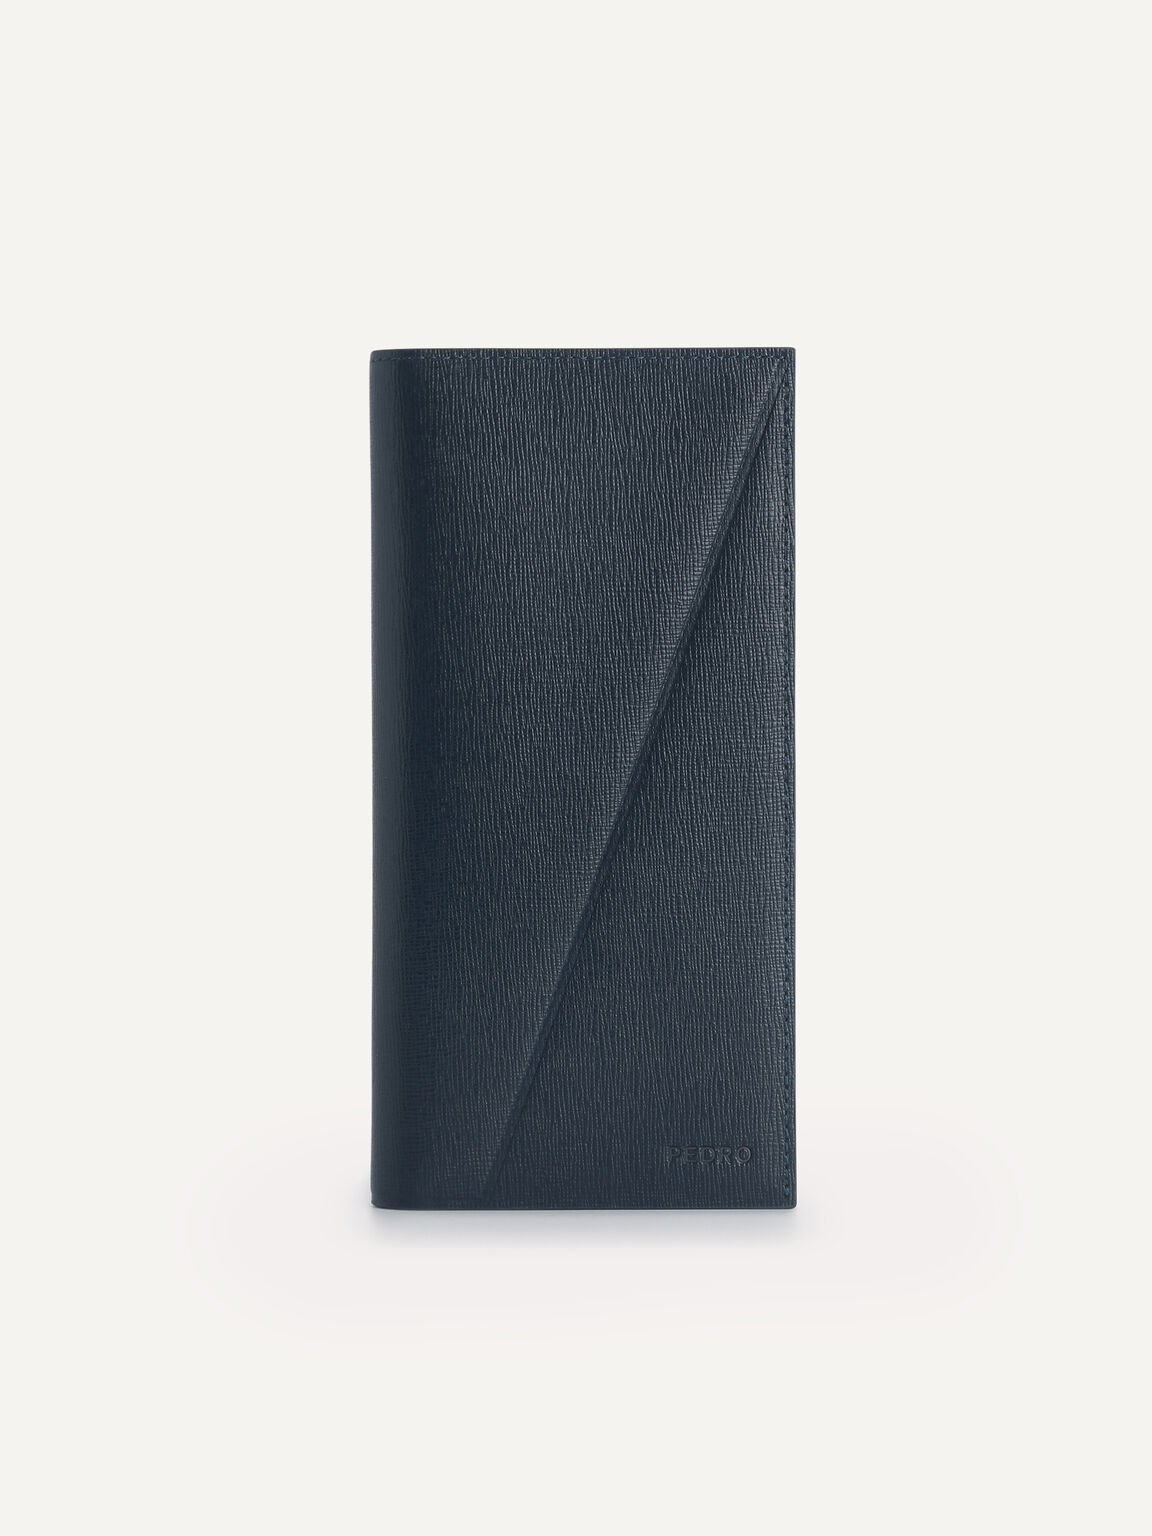 Long Textured Leather Wallet, Navy